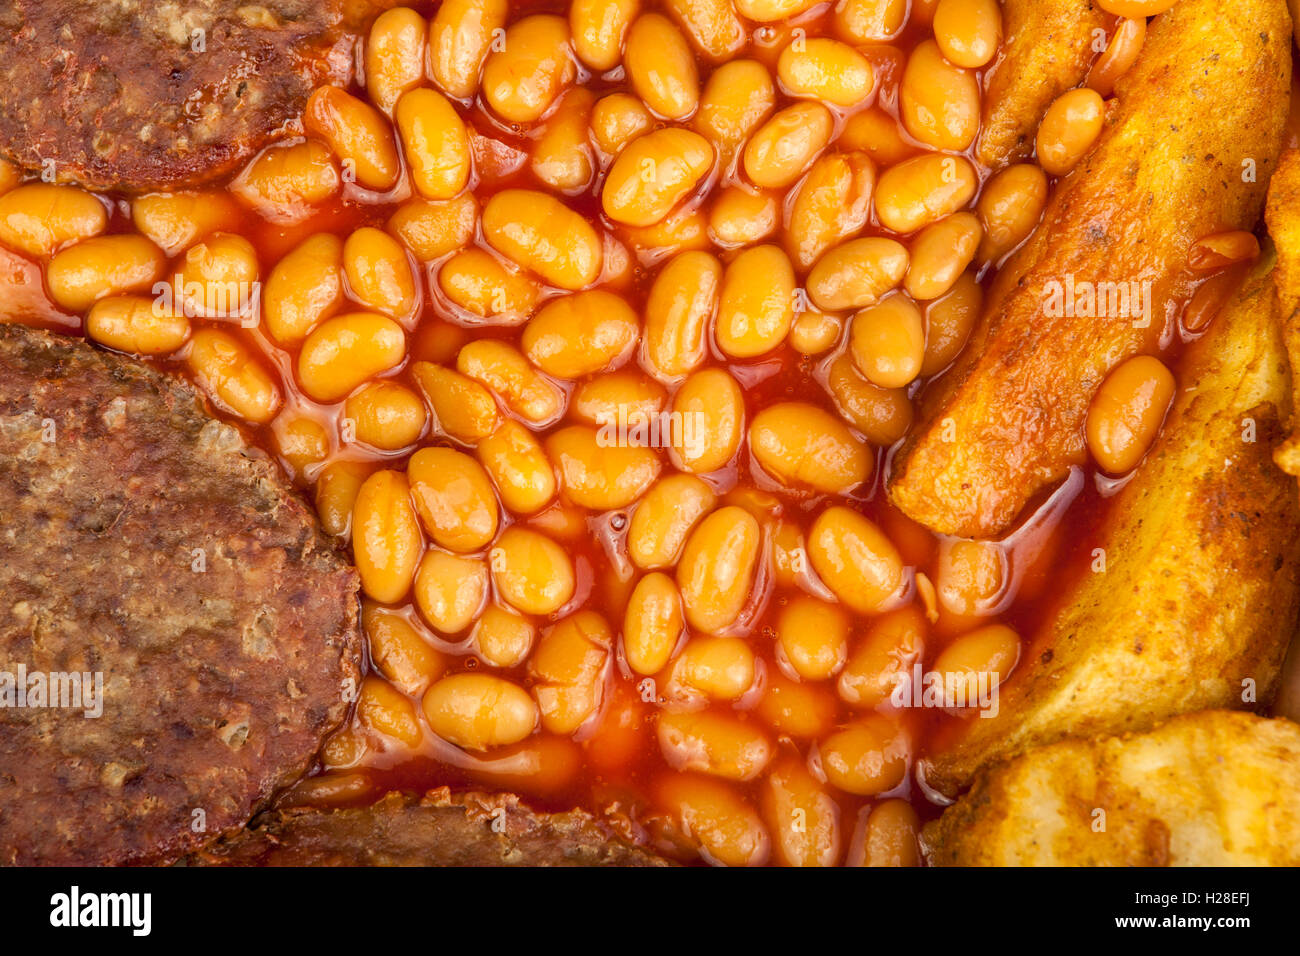 Close up shot of  beef burgers with golden brown potato wedges and baked beans Stock Photo